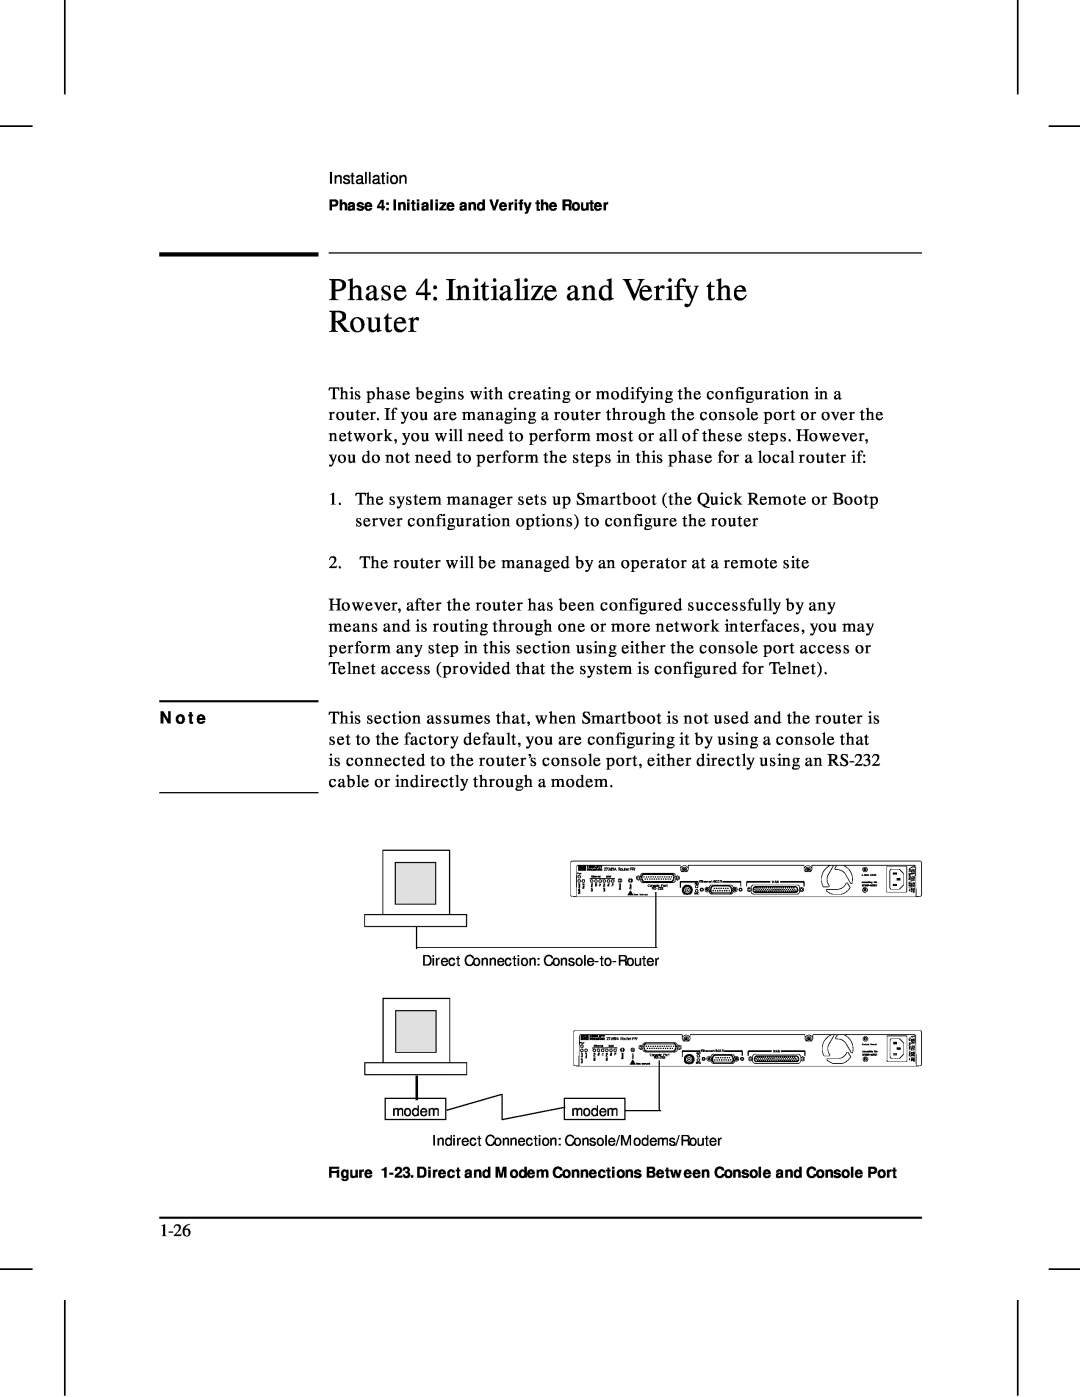 HP 480 manual Phase 4 Initialize and Verify the Router, N o t e 